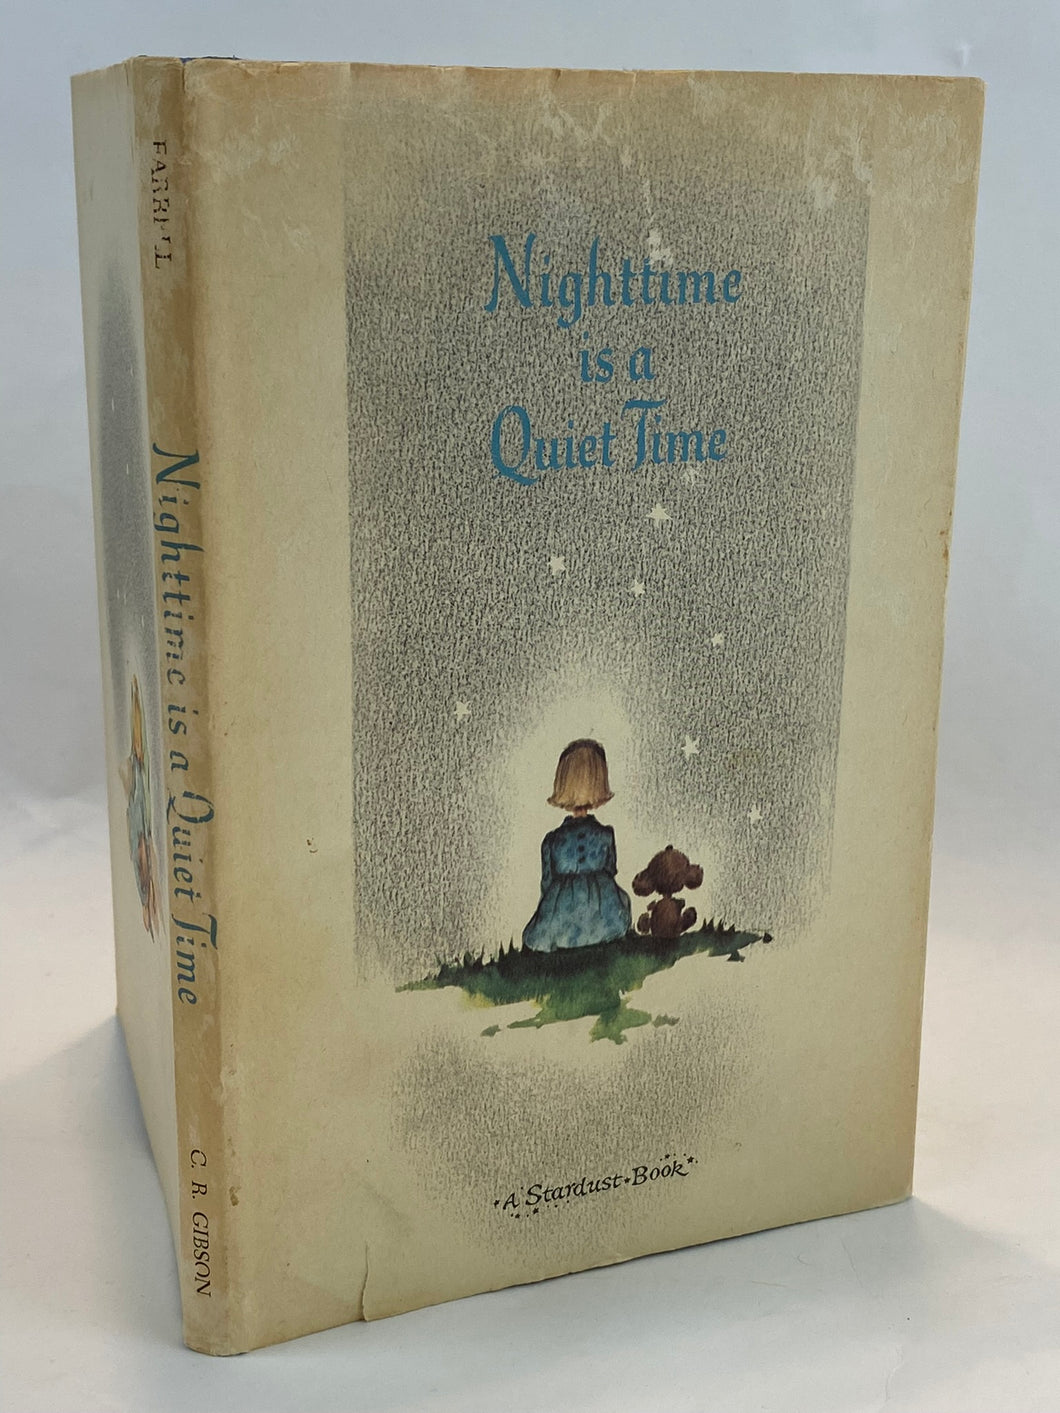 Nighttime is a Quiet Time Anne A. Farrell, 1968 CR Gibson